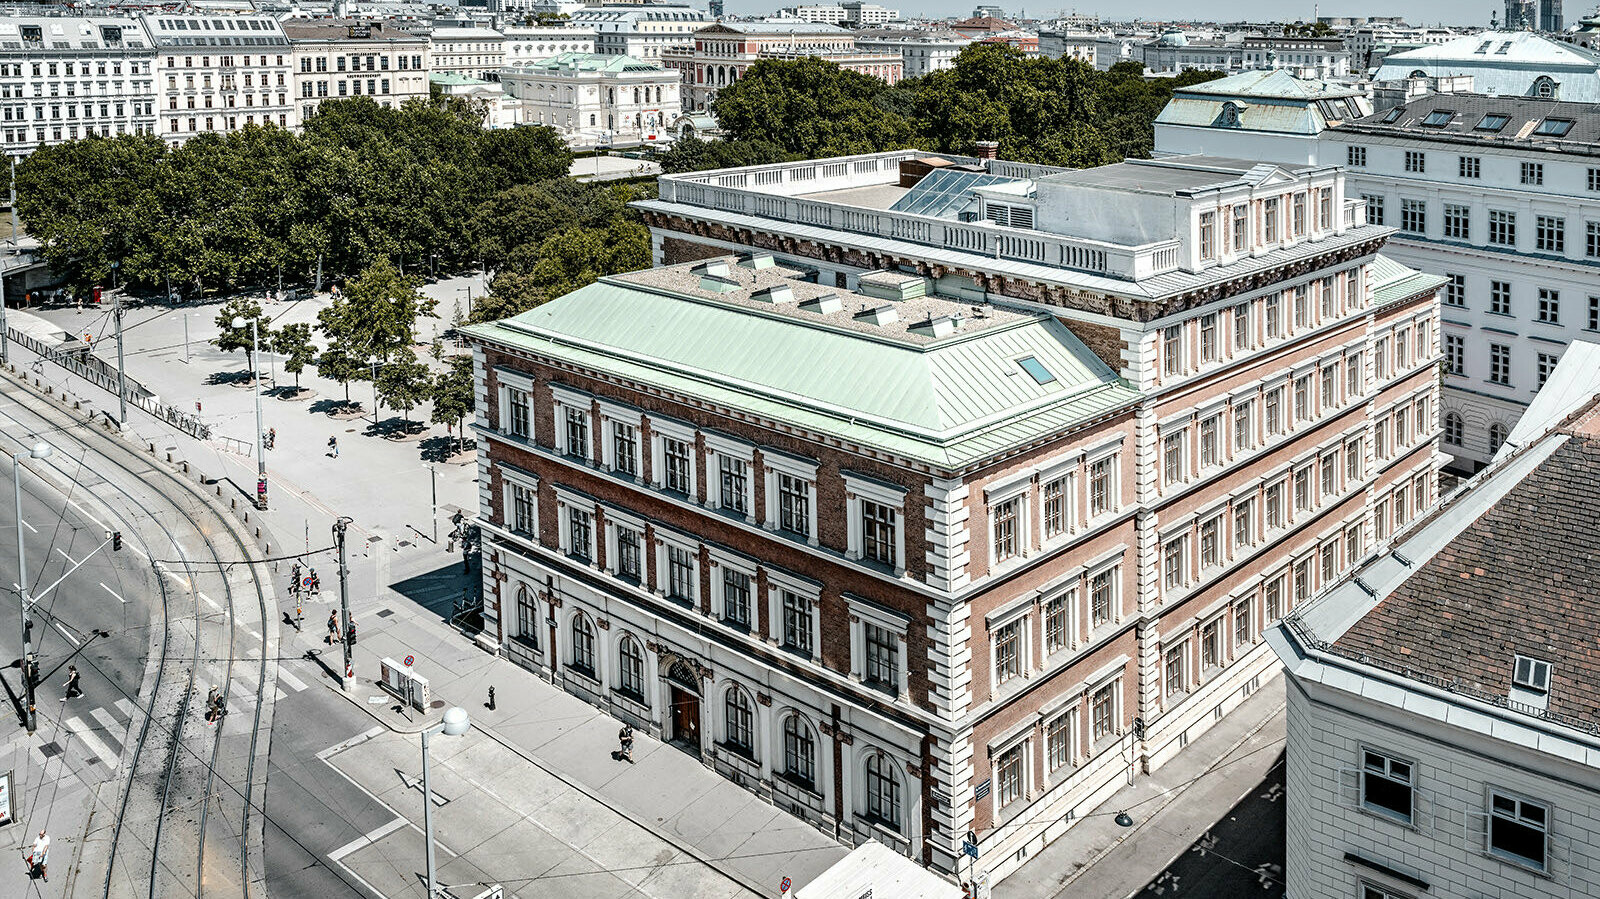 View of the protestant elementary school at Karlsplatz, Vienna. It is surrounded by buildings and trees.